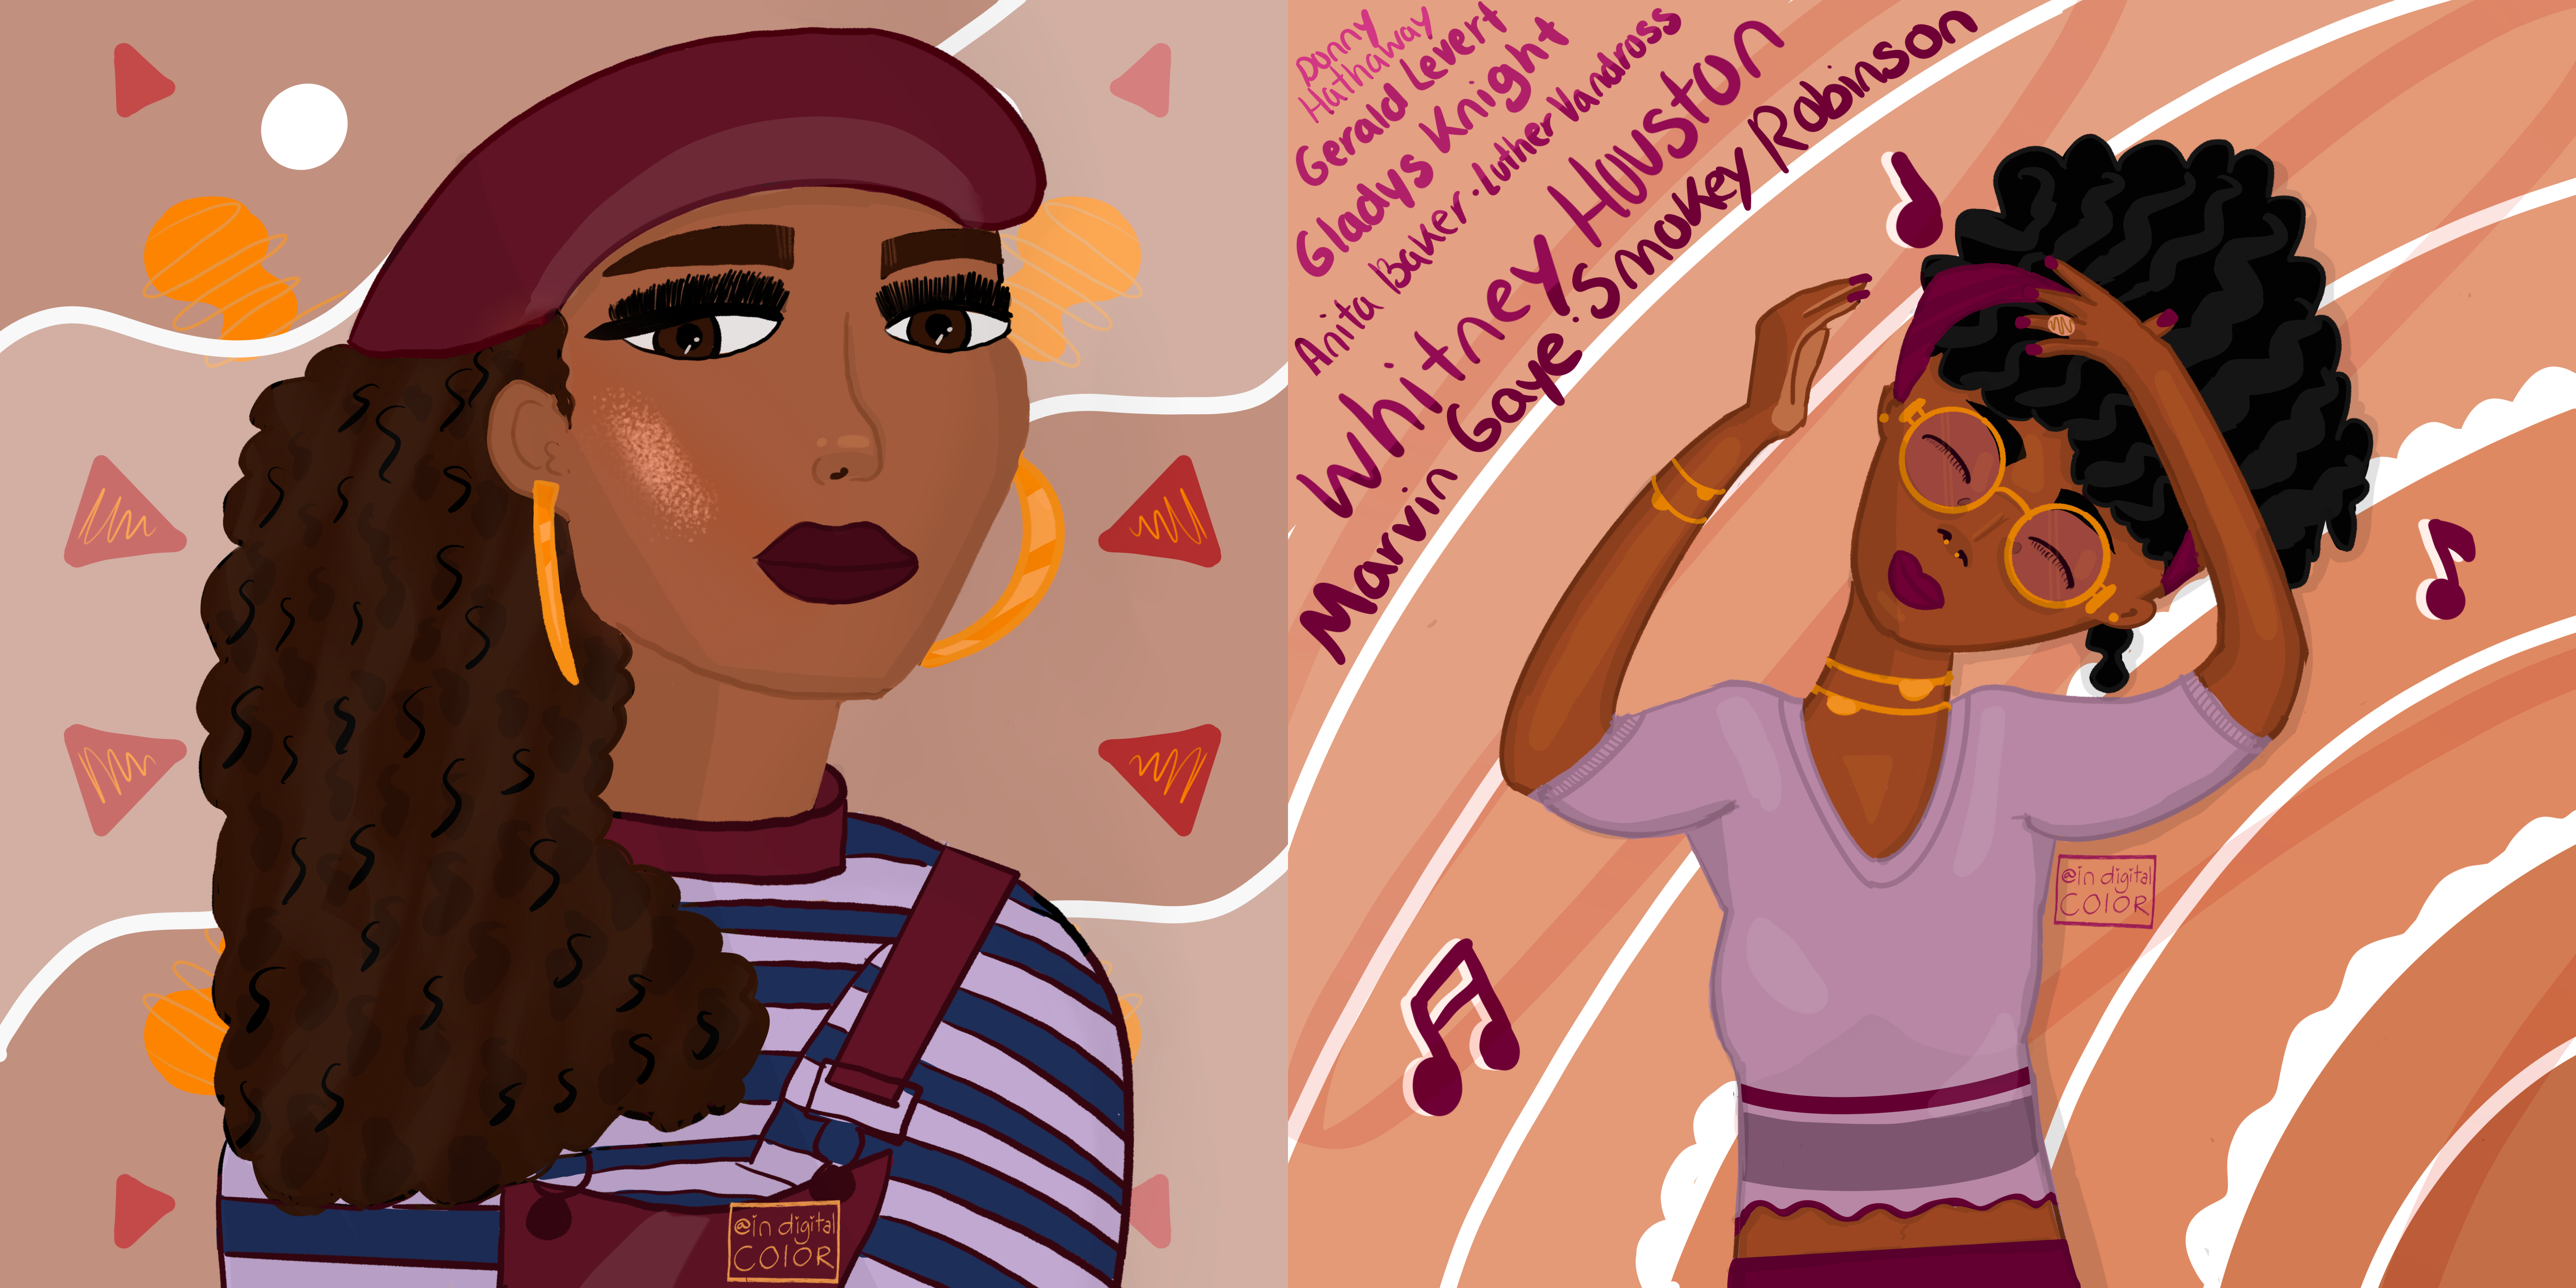 Cover Image for About The Artist:  Featuring two portraits illustrated by Monica. The one on the left features a Black woman with natural hair wearing a magenta beret and overalls along with a purple striped shirt and gold hoop earrings looking straight ahead over an abstract background. The one on the right features a Black woman with her natural hair pulled up while wearing a purple shirt and having her hands up dancing with musical notes appearing over an abstract background, in the background the names of various musical artists including Whitney Houston, Marvin Gaye, Smokey Robinson, Anita Baker, Luther Vandross, etc. appear. 